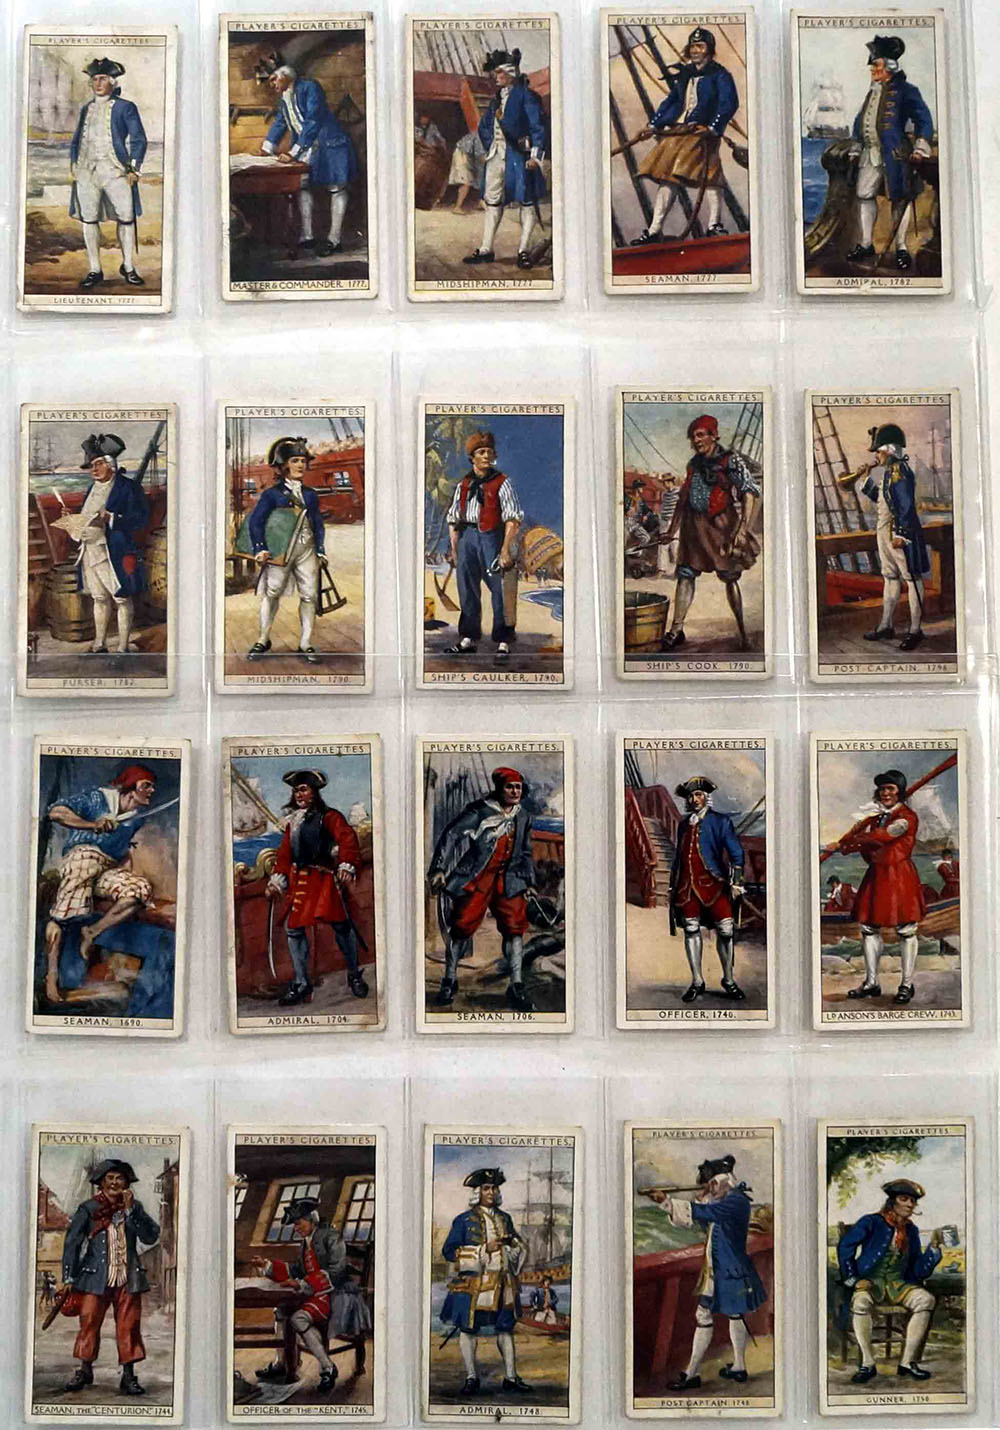 Full Set of 50 Cigarette Cards History of Naval Dress (1930) at The Book Palace